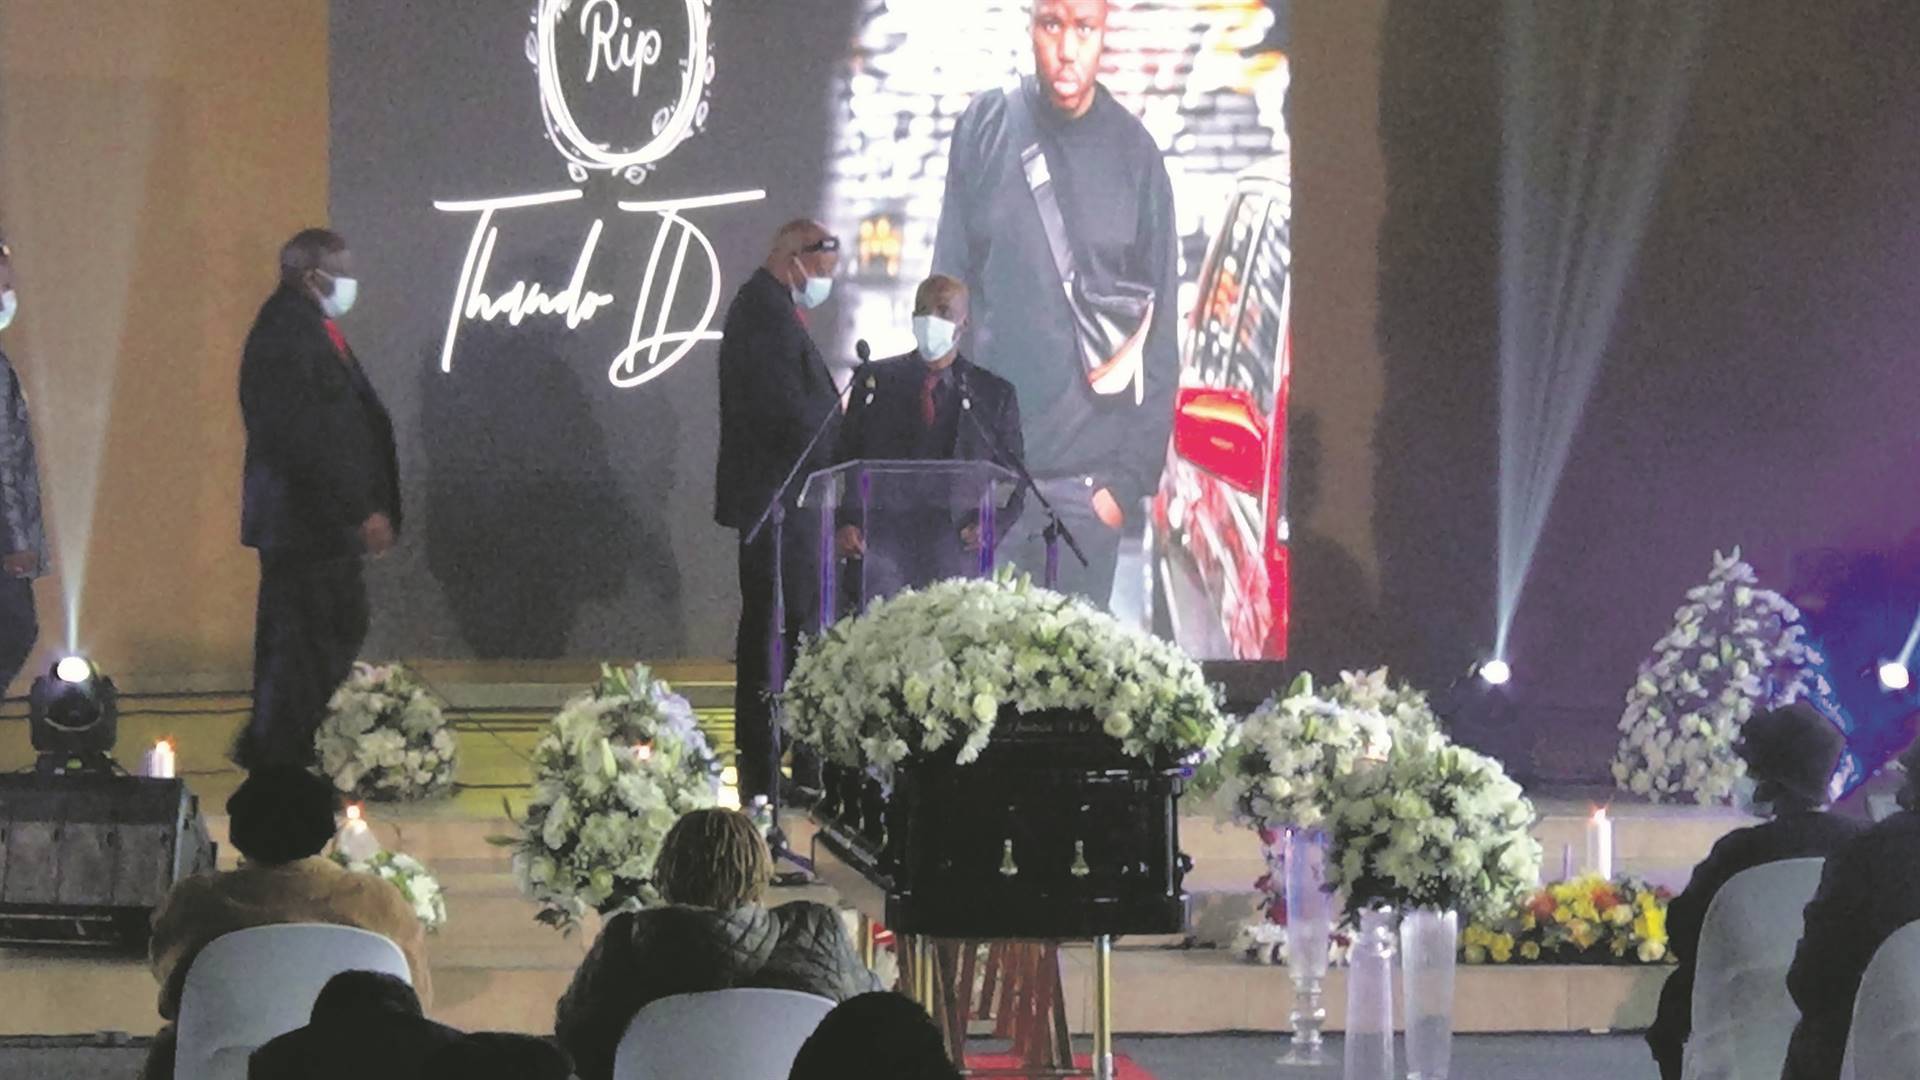 Family and friends gathered to bid farewell to Thando Khunjwa at his funeral. Photo by Lucky Morajane